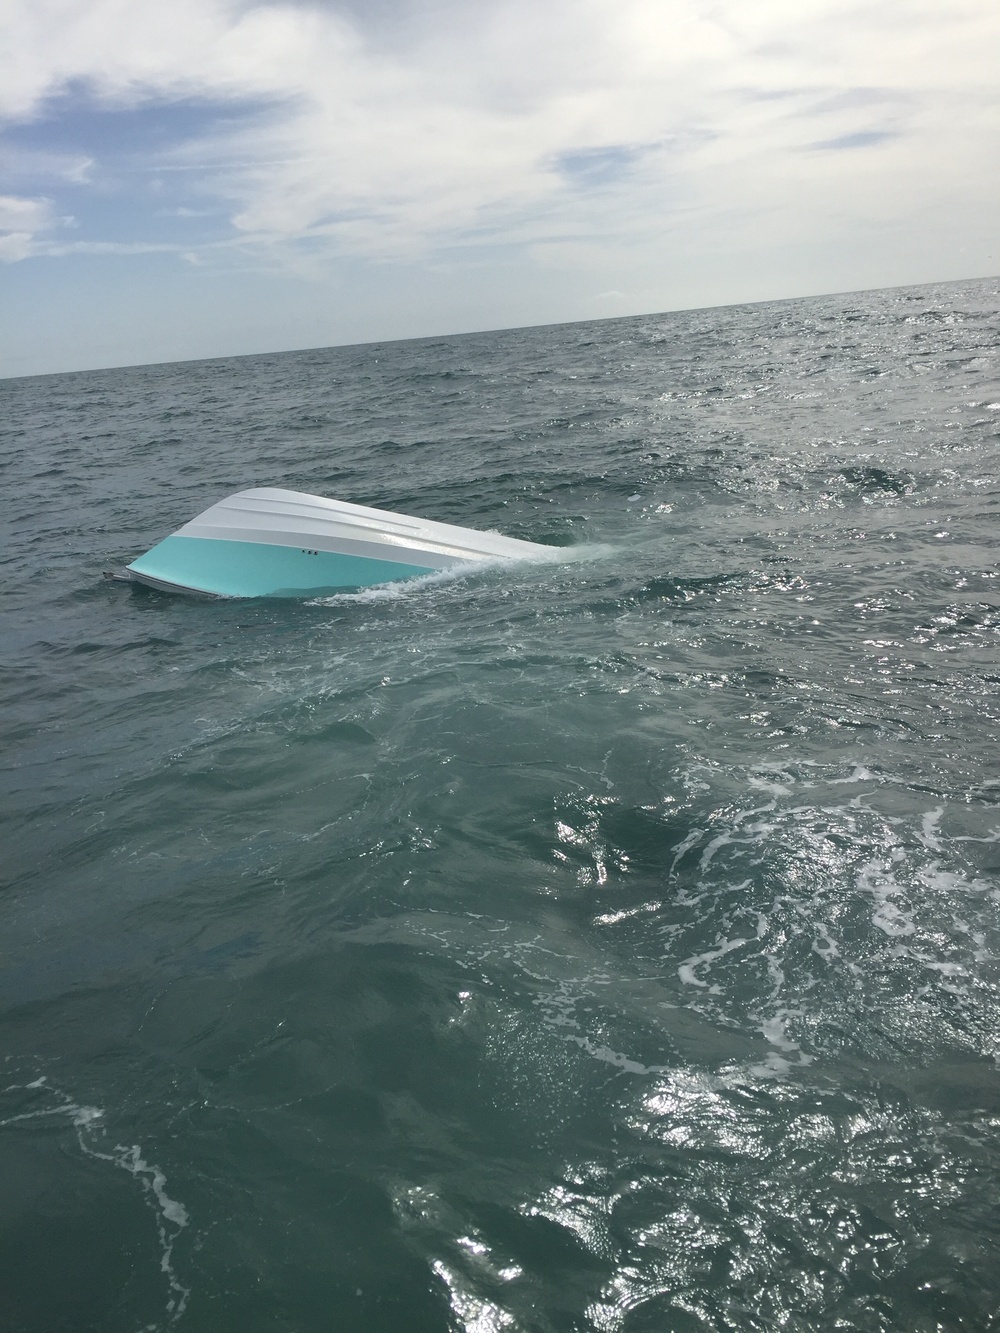 Coast Guard rescues 4 from capsizing vessel near Freeport, Texas